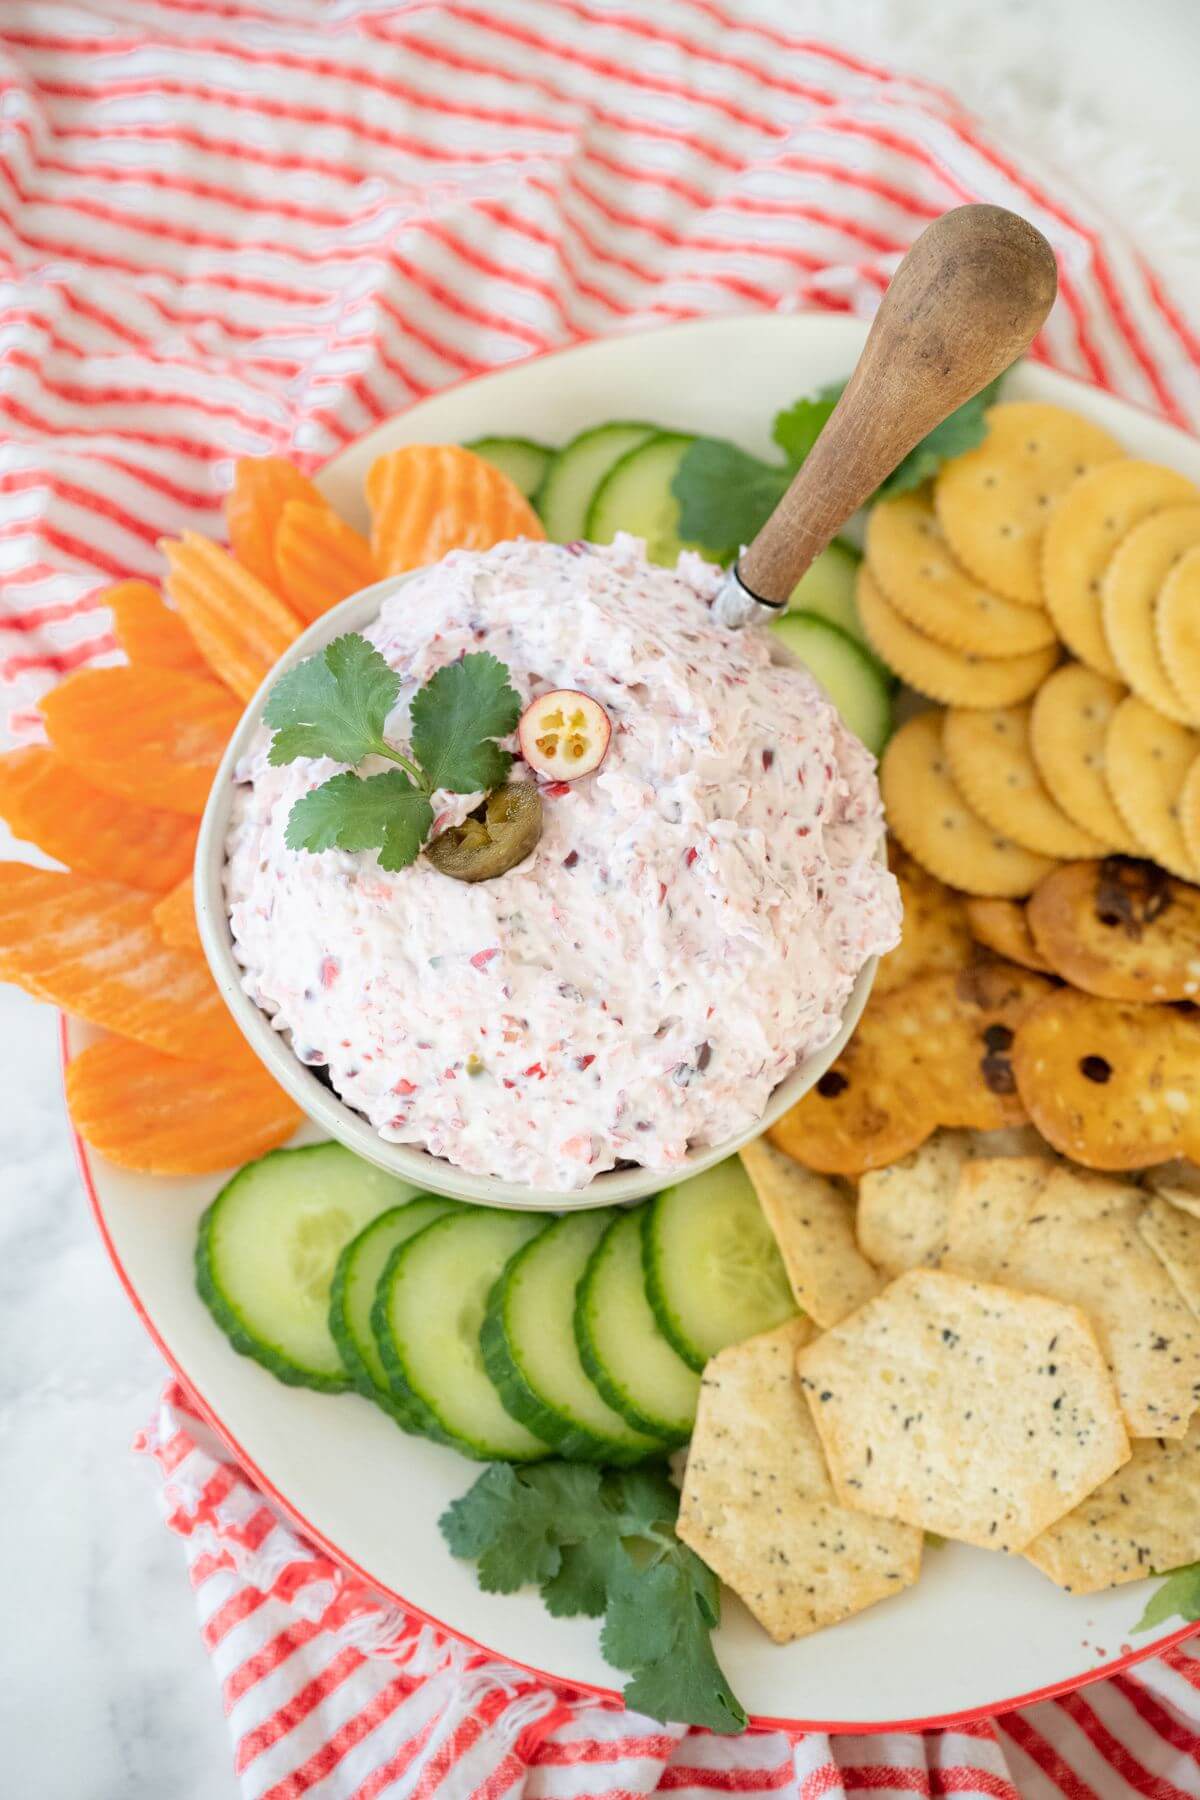 Top view of bowl of dip surrounded by carrots, cucumbers, and crackers.